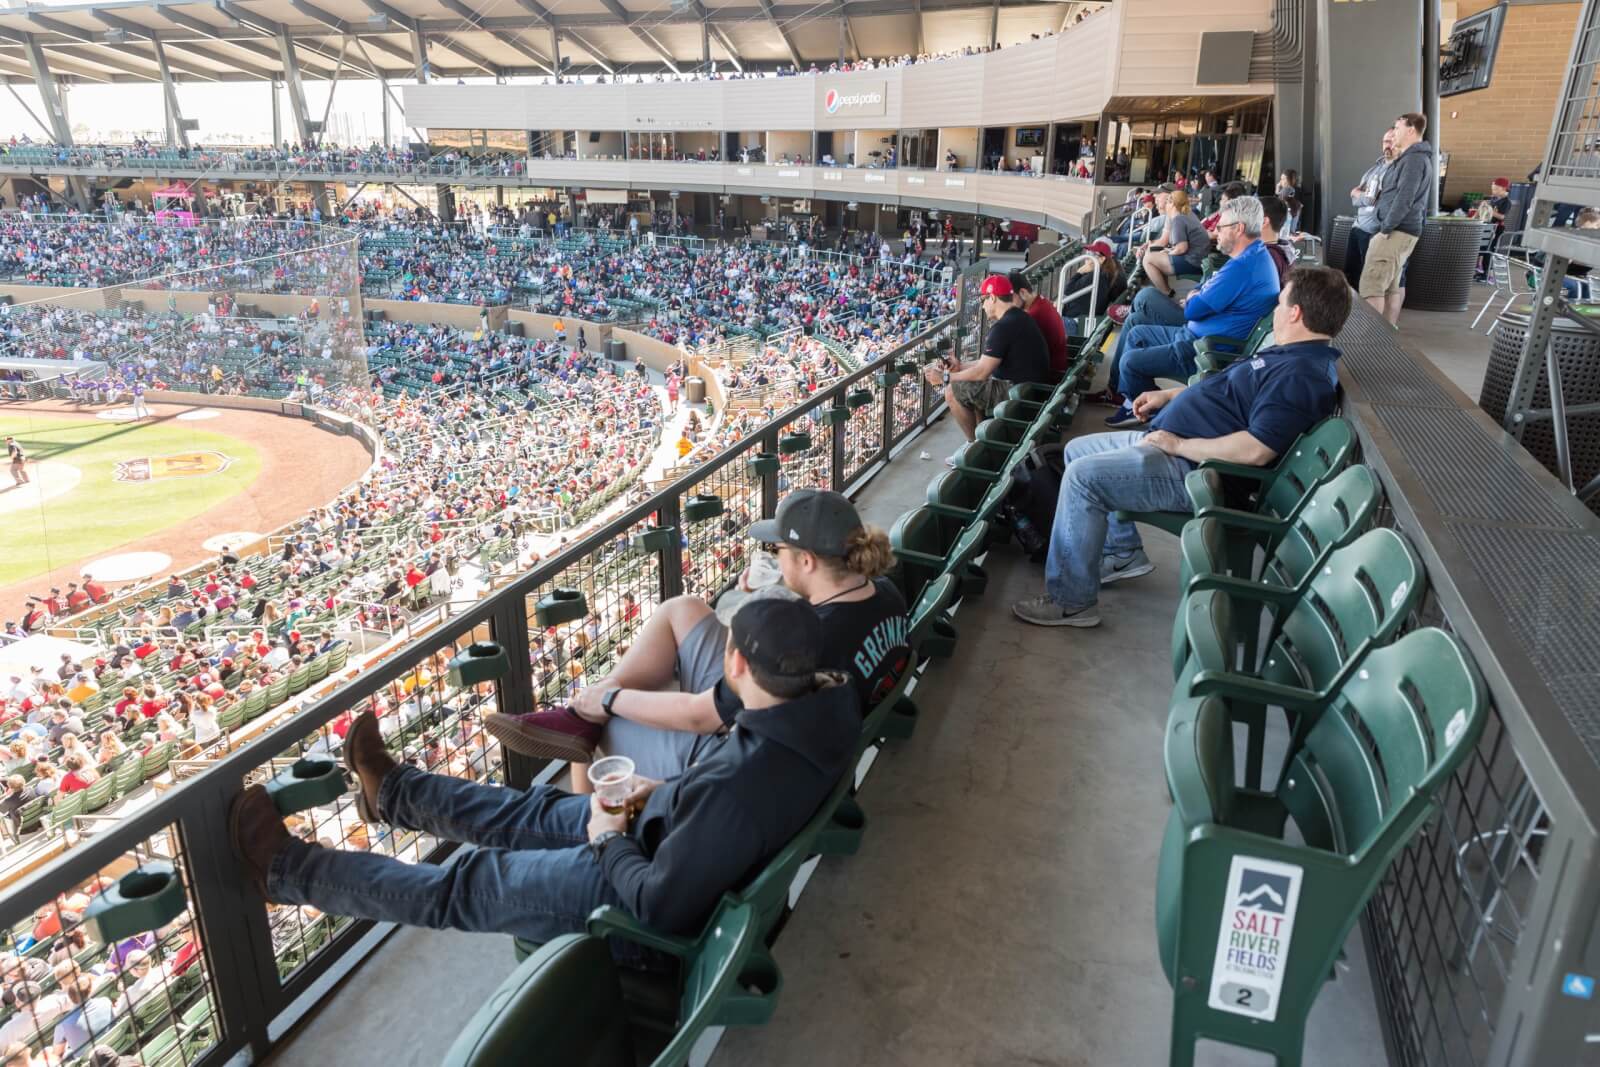 Visitors watch a ball game at Salt River Fields.